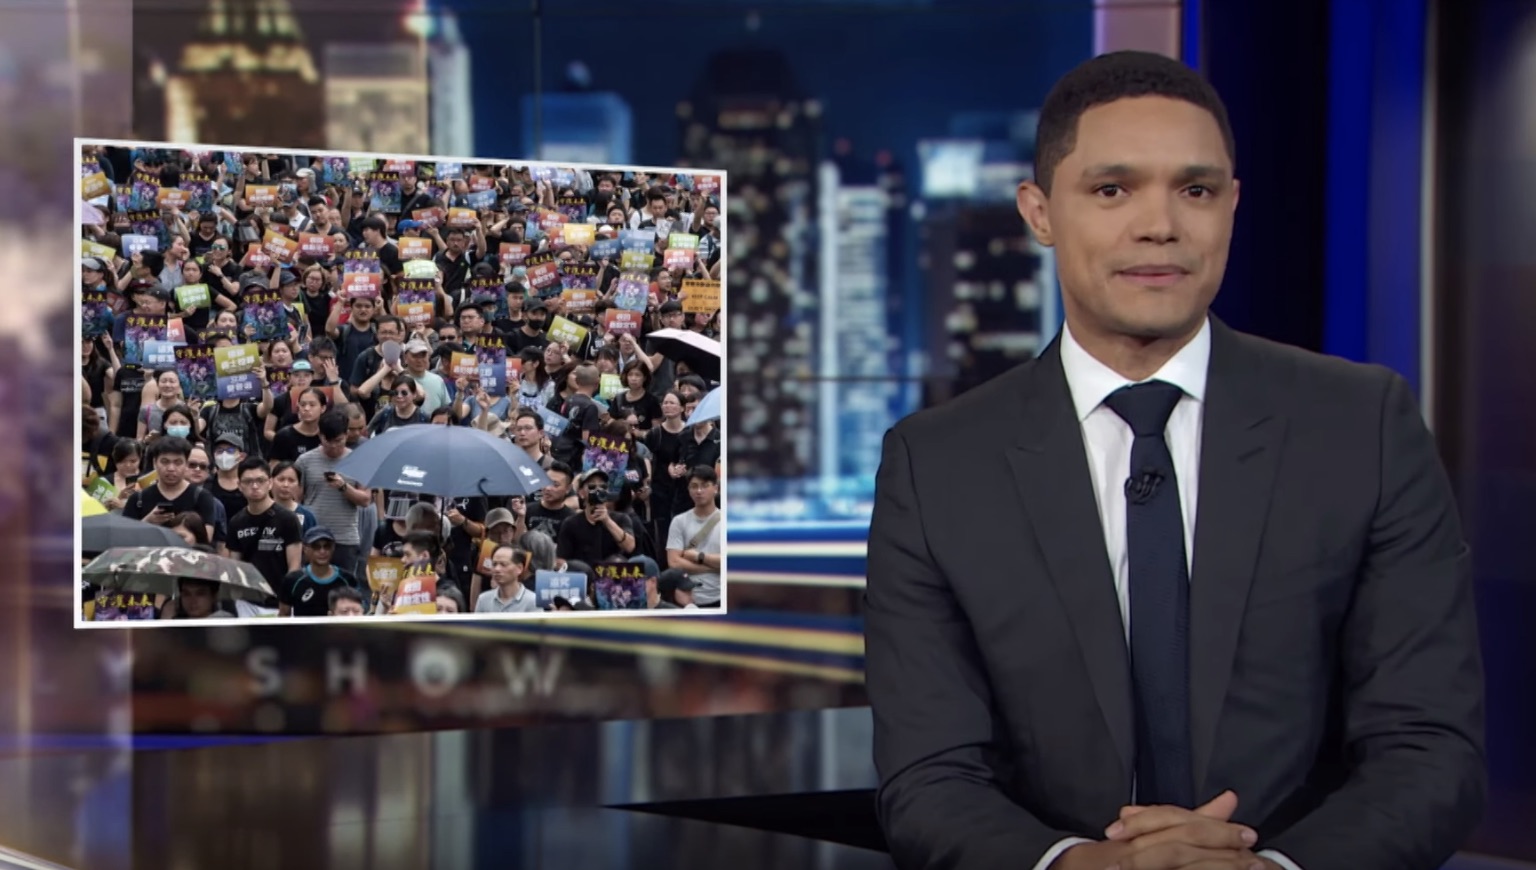 Trevor Noah on a recent episode of The Daily Show talking about the Hong Kong protests. Screengrab via YouTube.